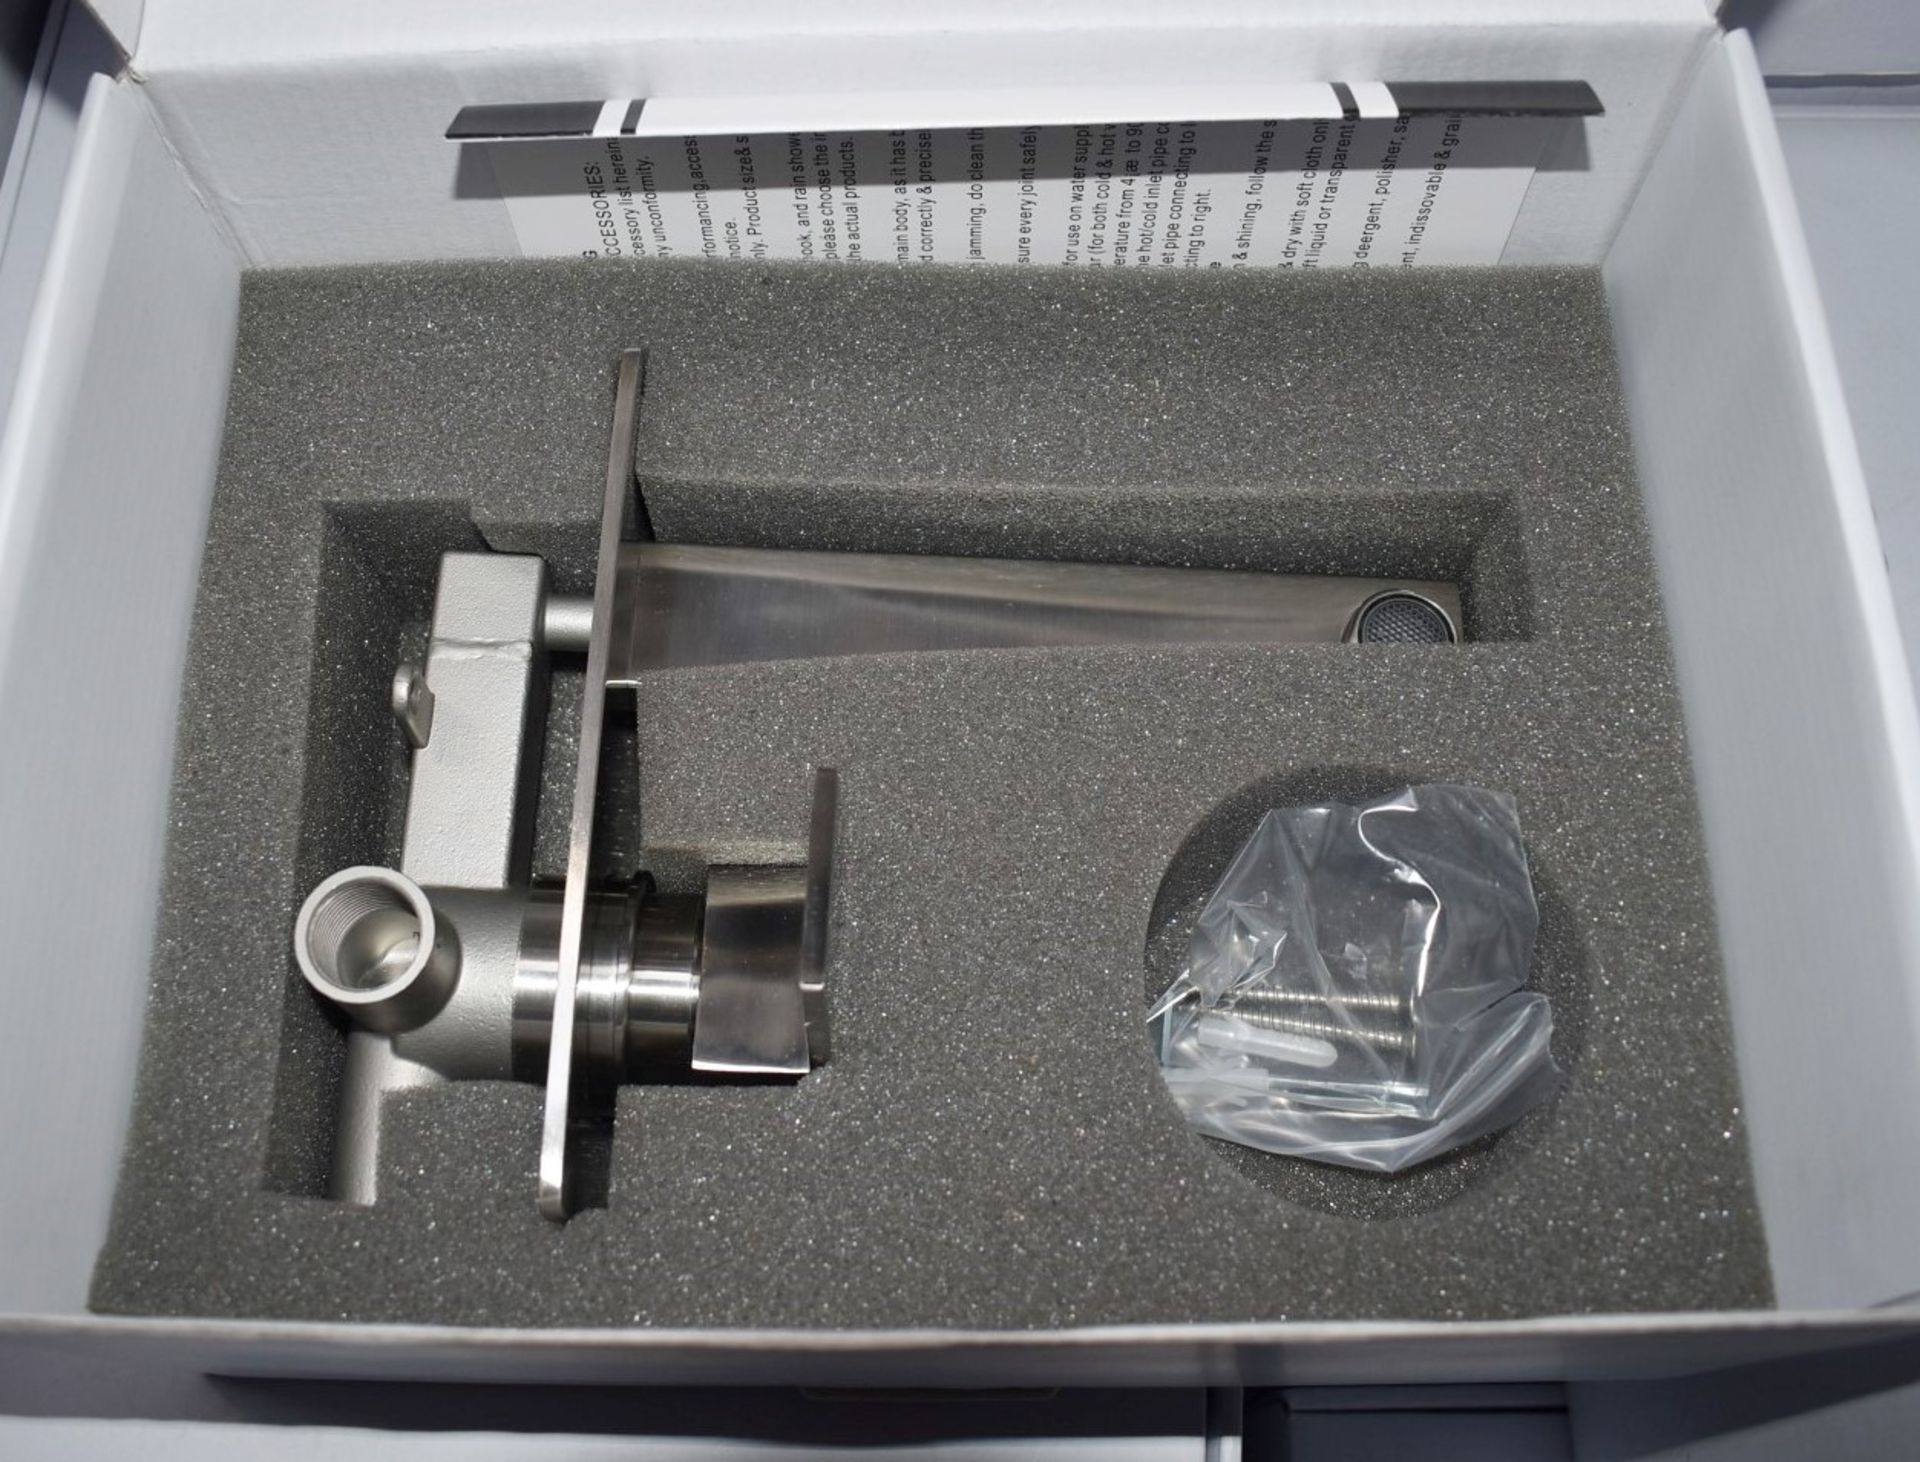 4 x Stonearth 'Metro' Stainless Steel Wall Mounted Taps - Brand New & Boxed - RRP £1,380 - Ref: - Image 8 of 8